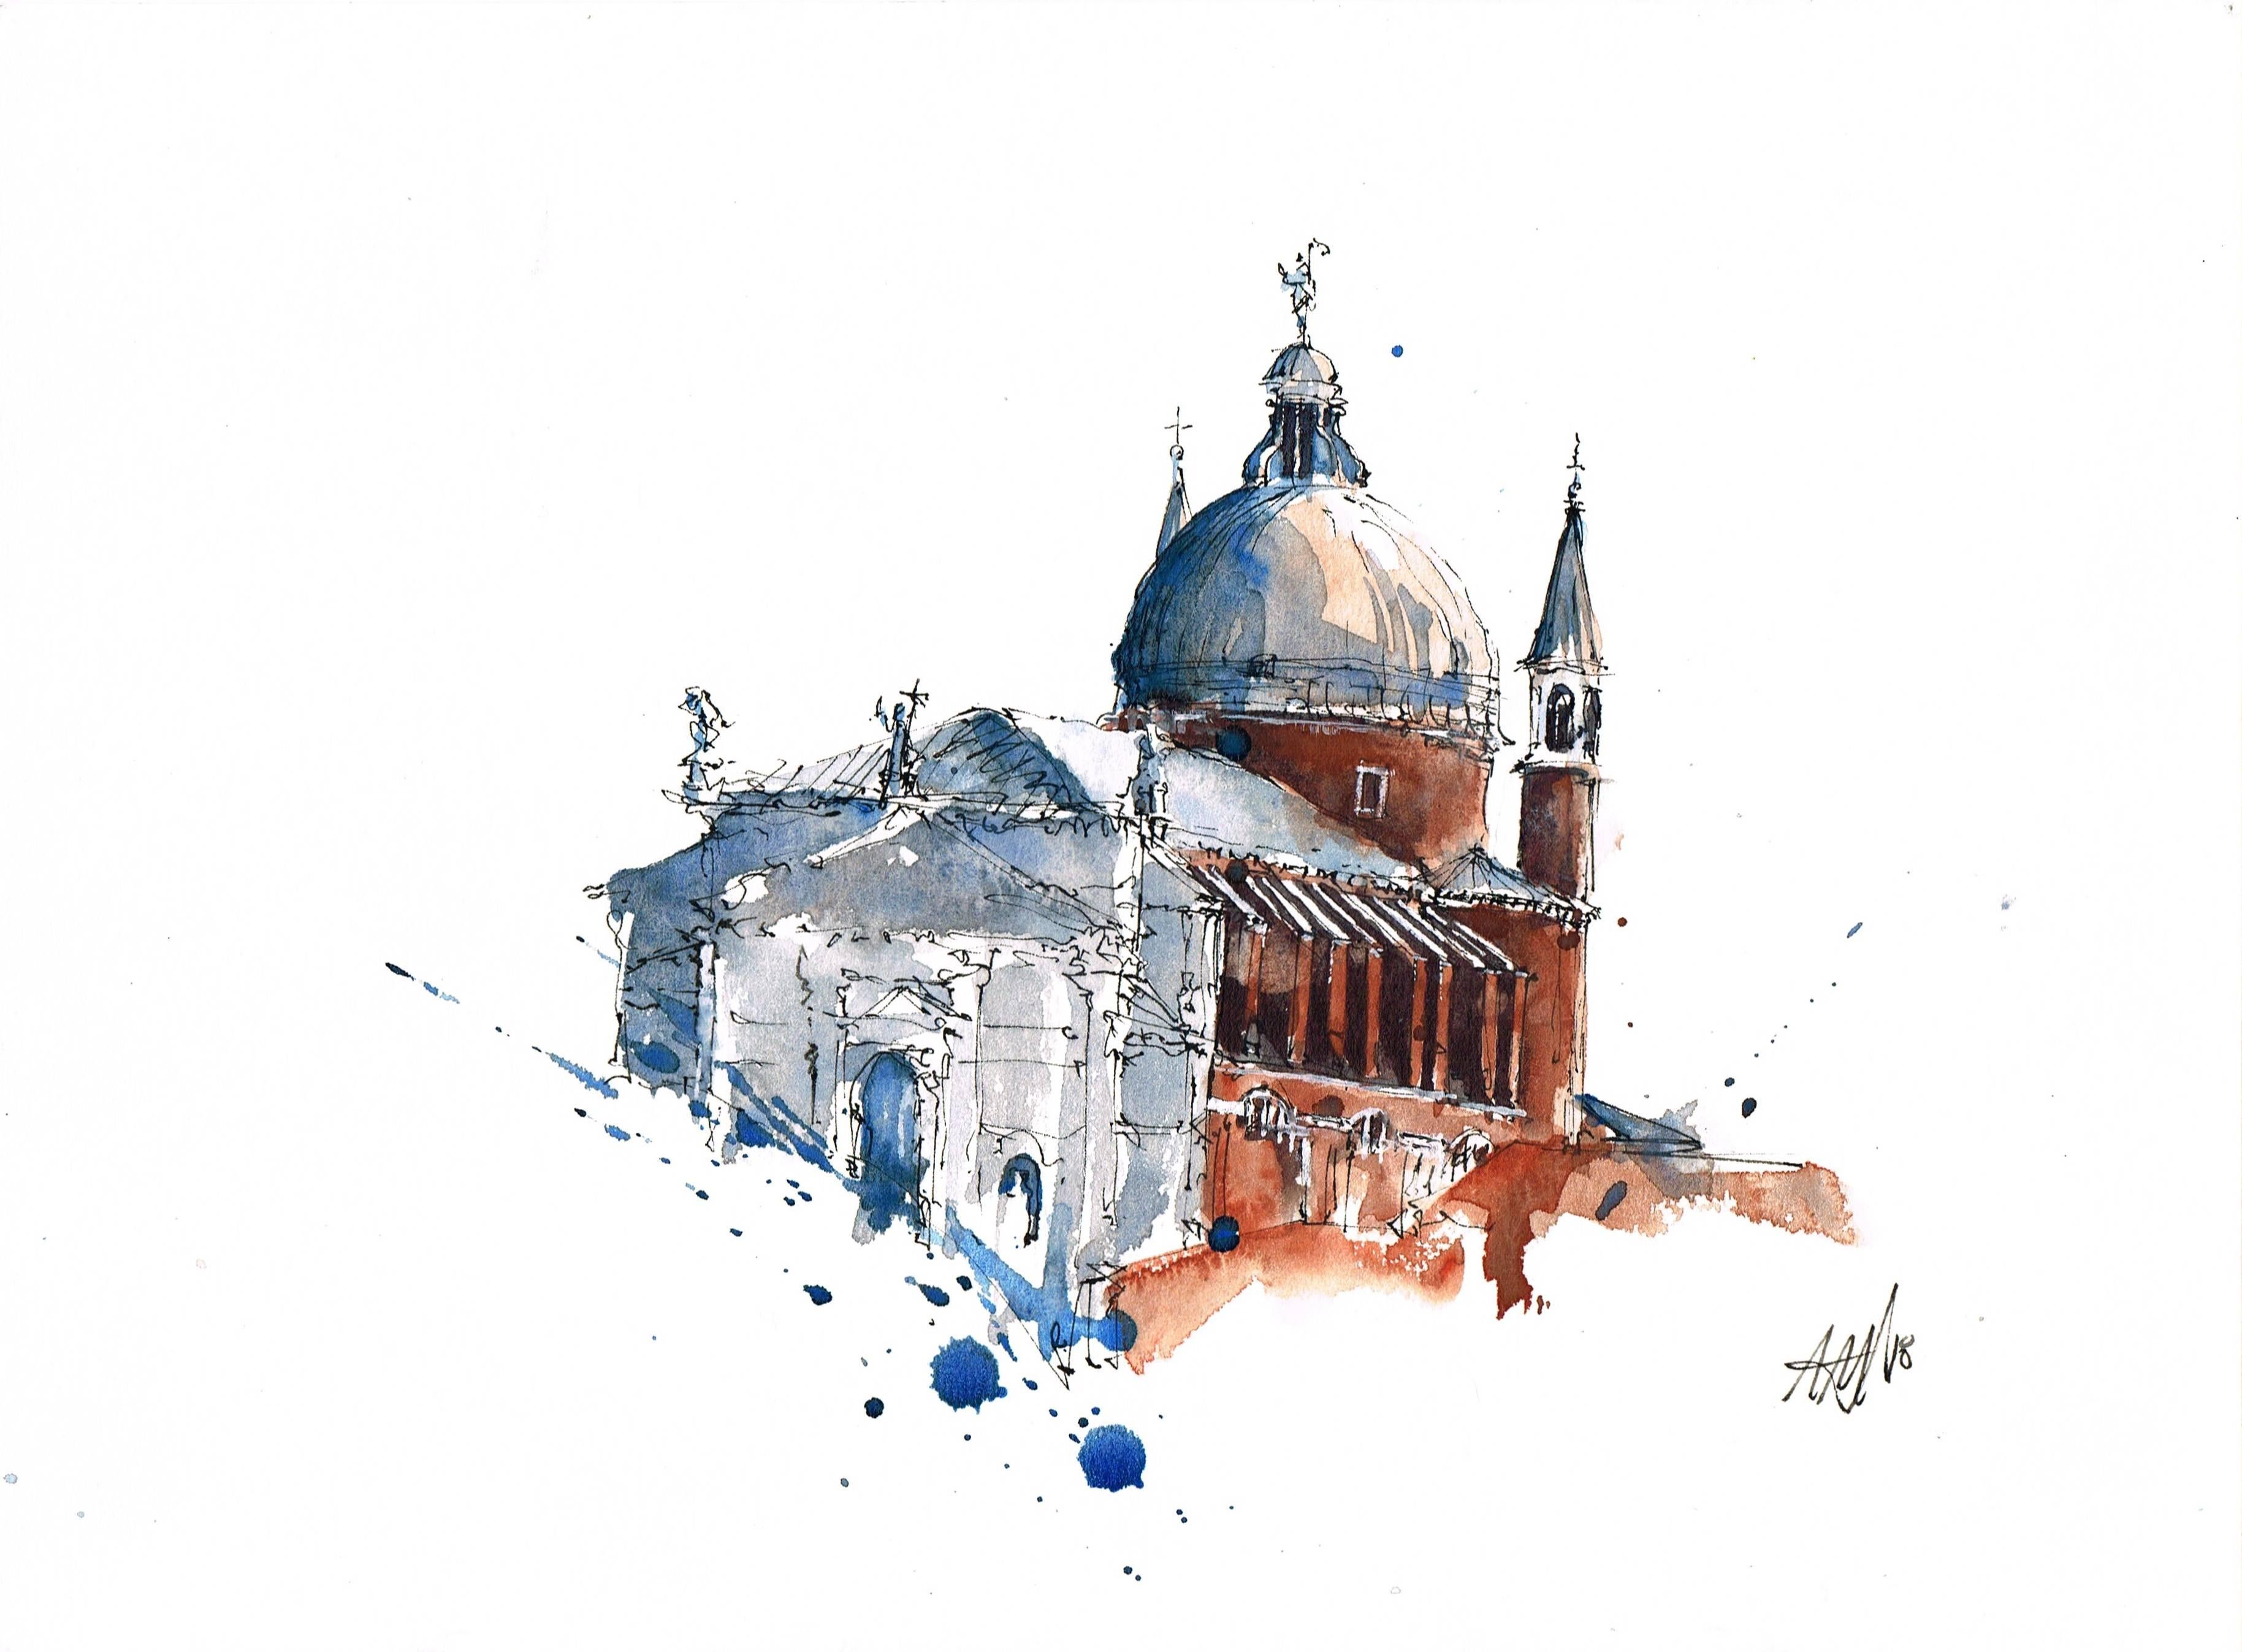 "Il Redentore" - Venice - Architectural Watercolor Painting - Turner